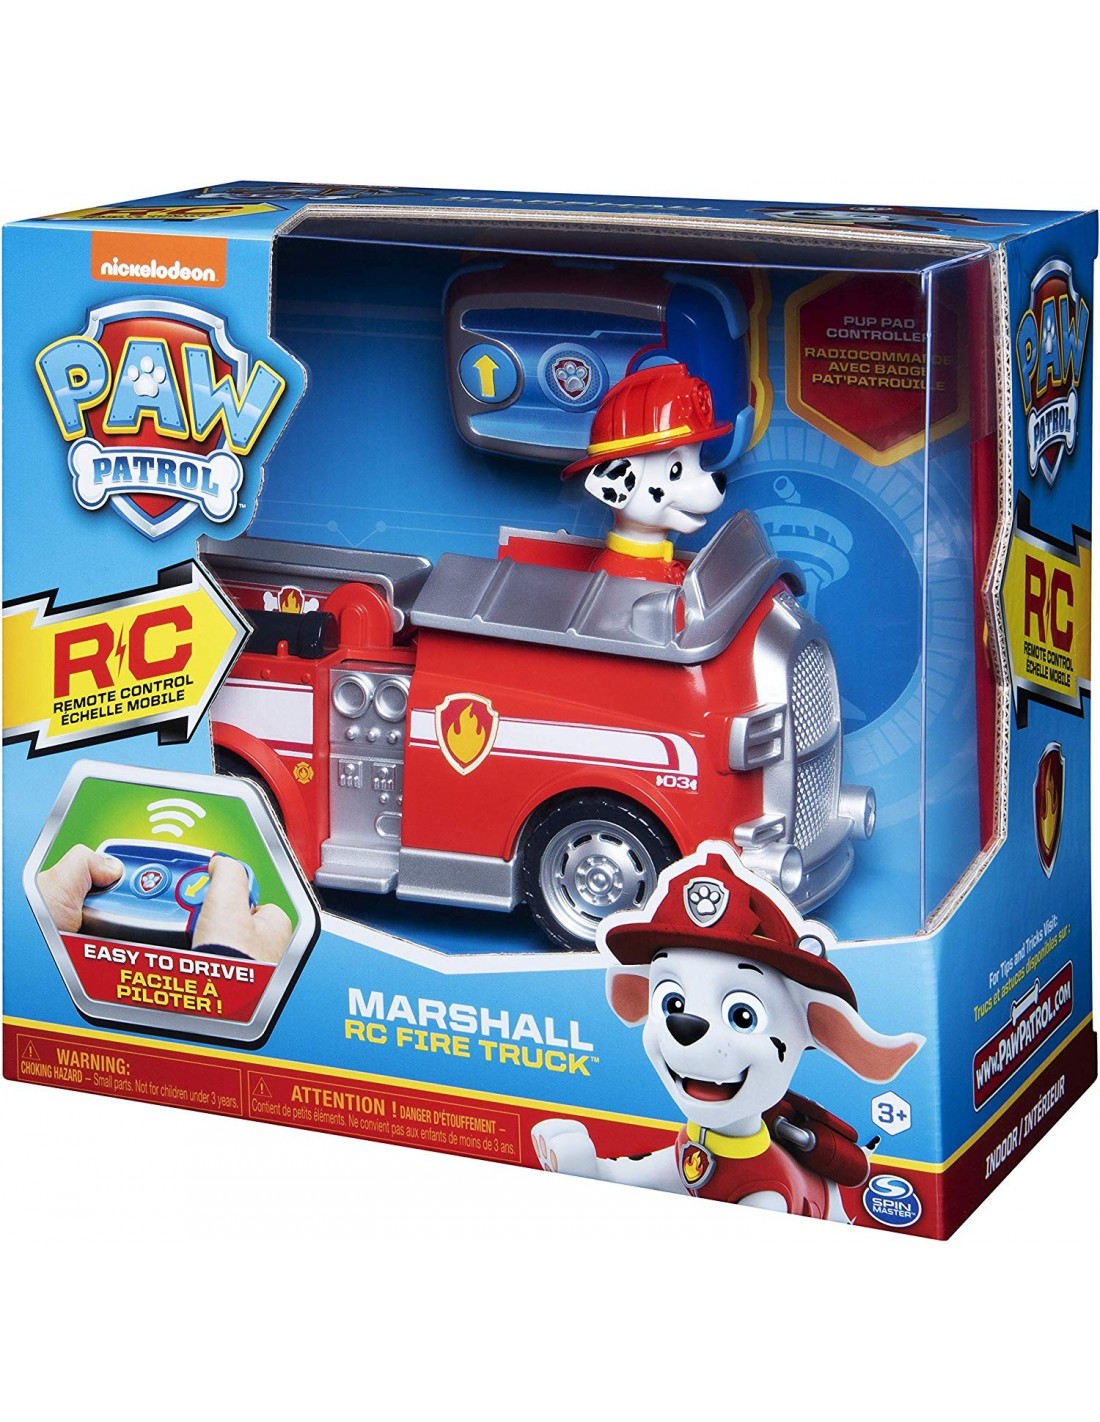 spin-master-paw-patrol-marshall-remote-control-fire-truck